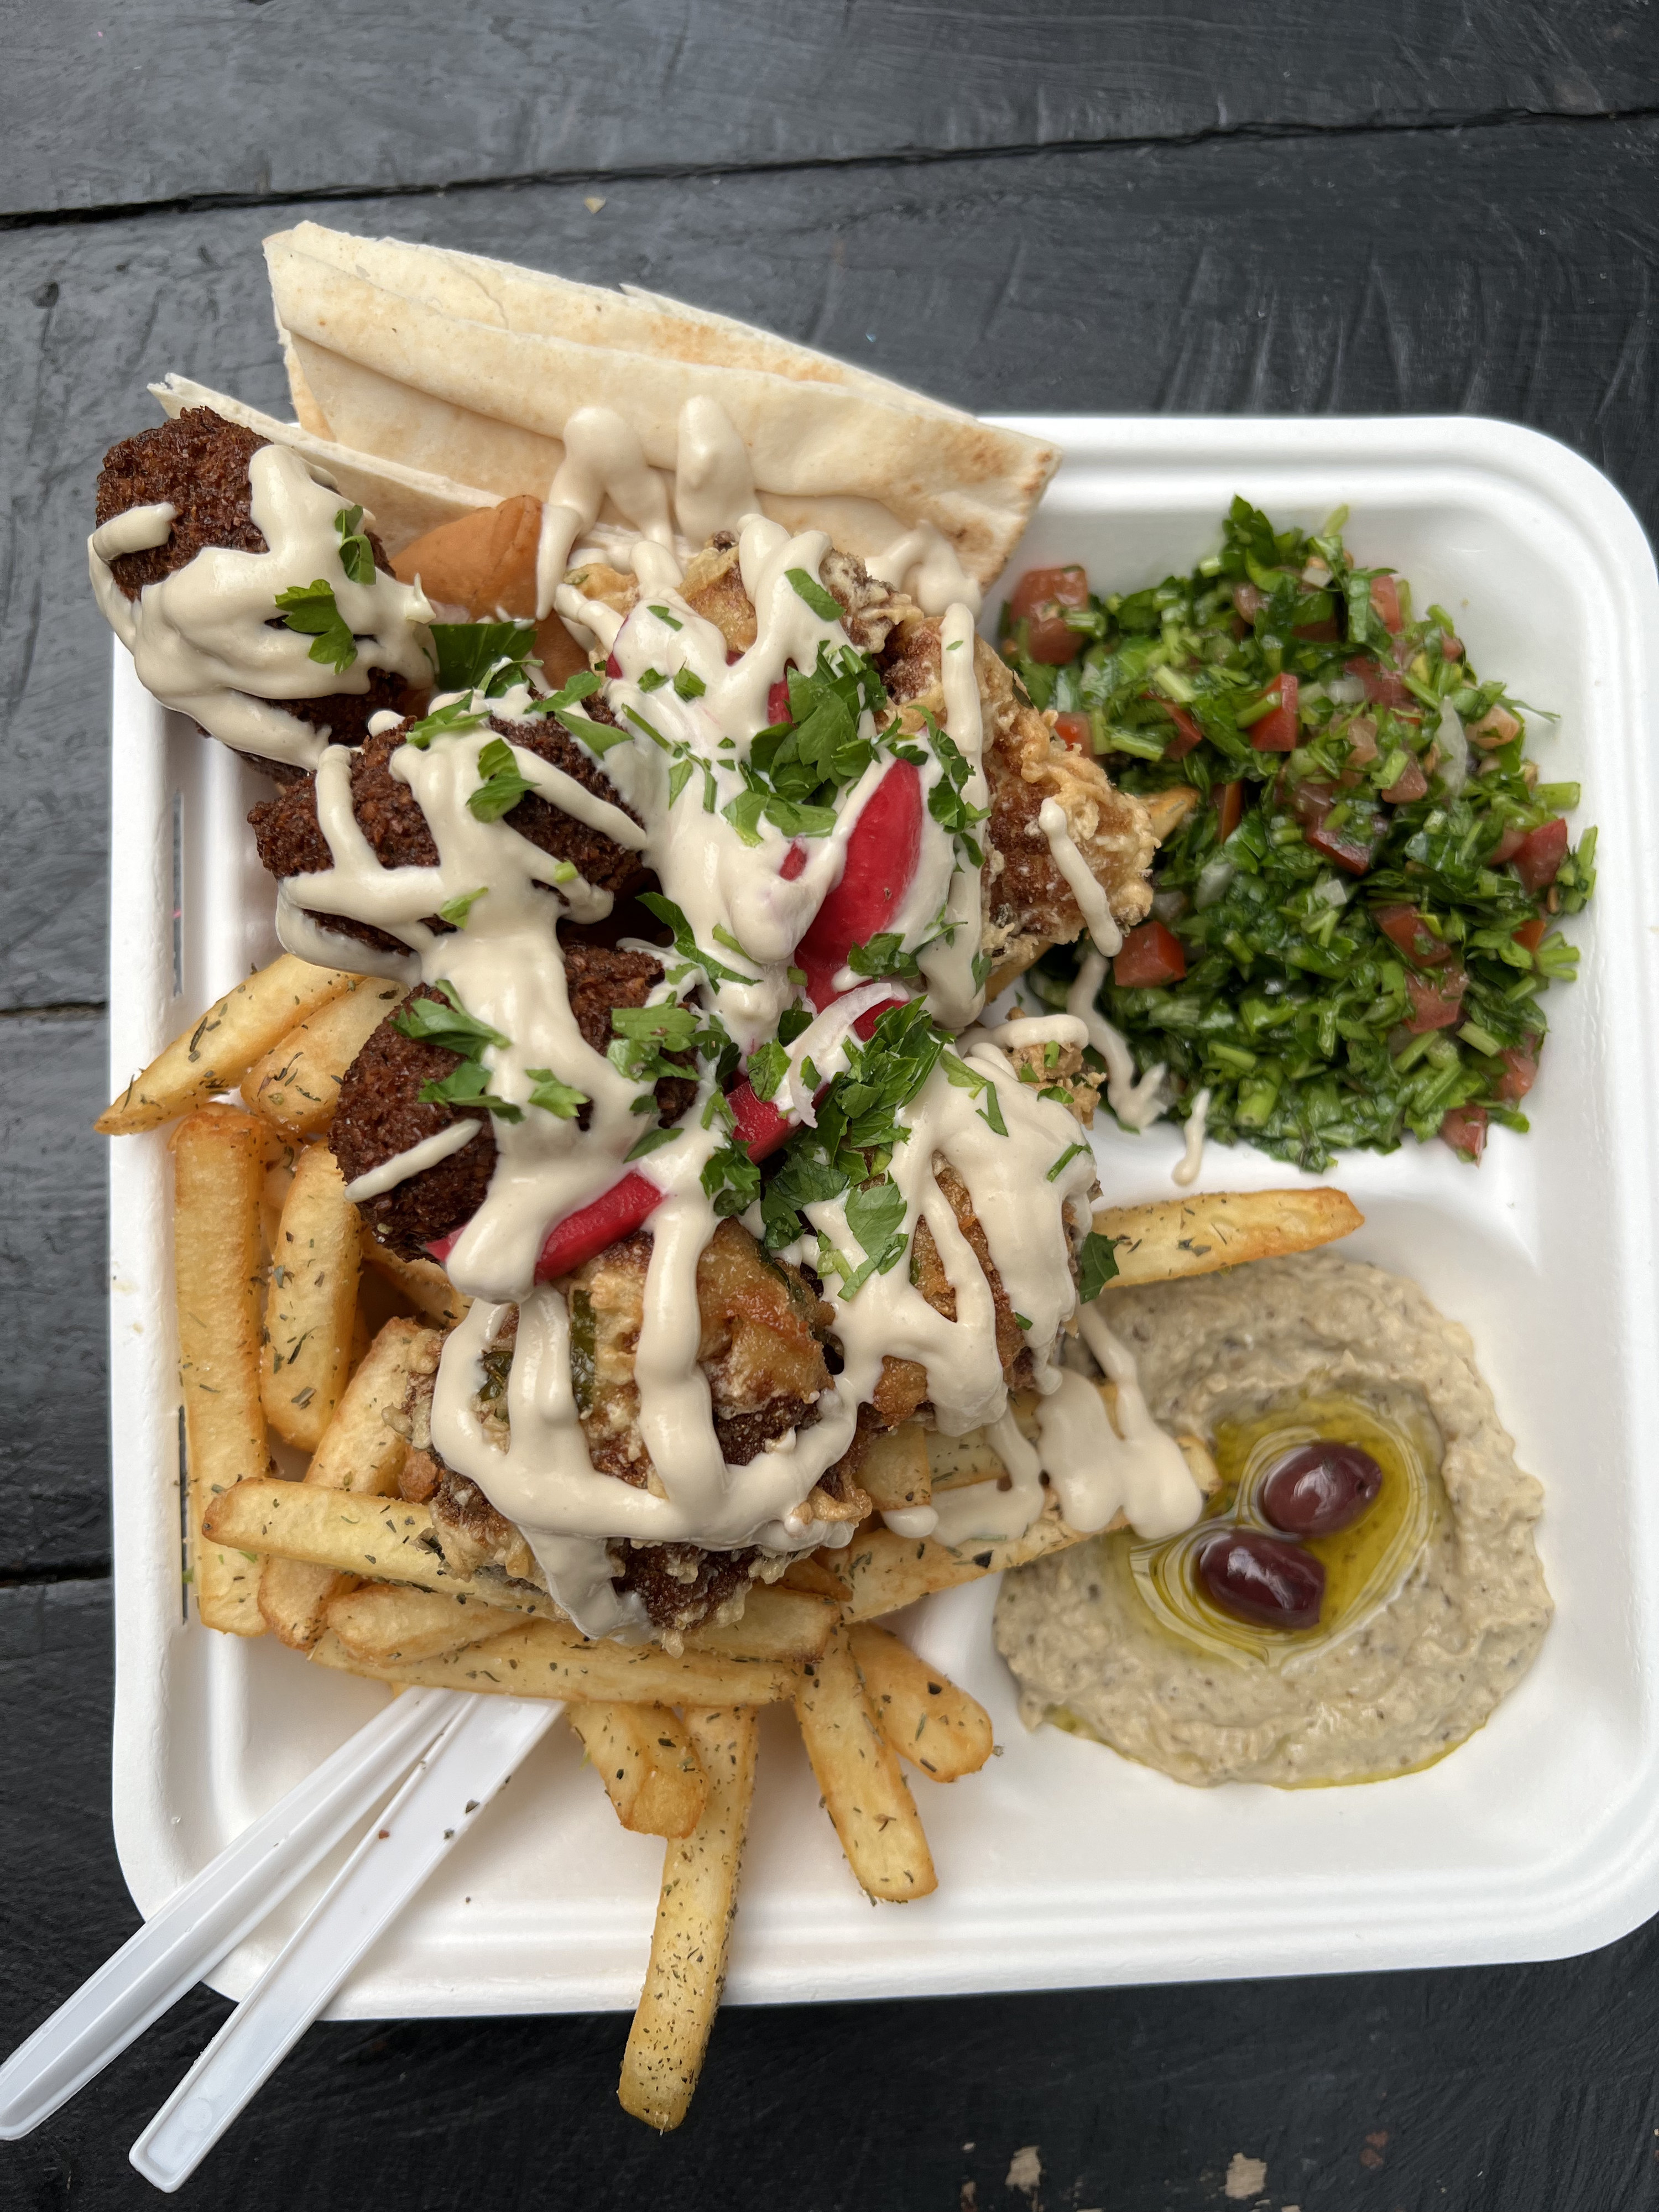 A takeout container filled with eggplant dip, tabouli, chips, falafel, cauliflower and pita bread